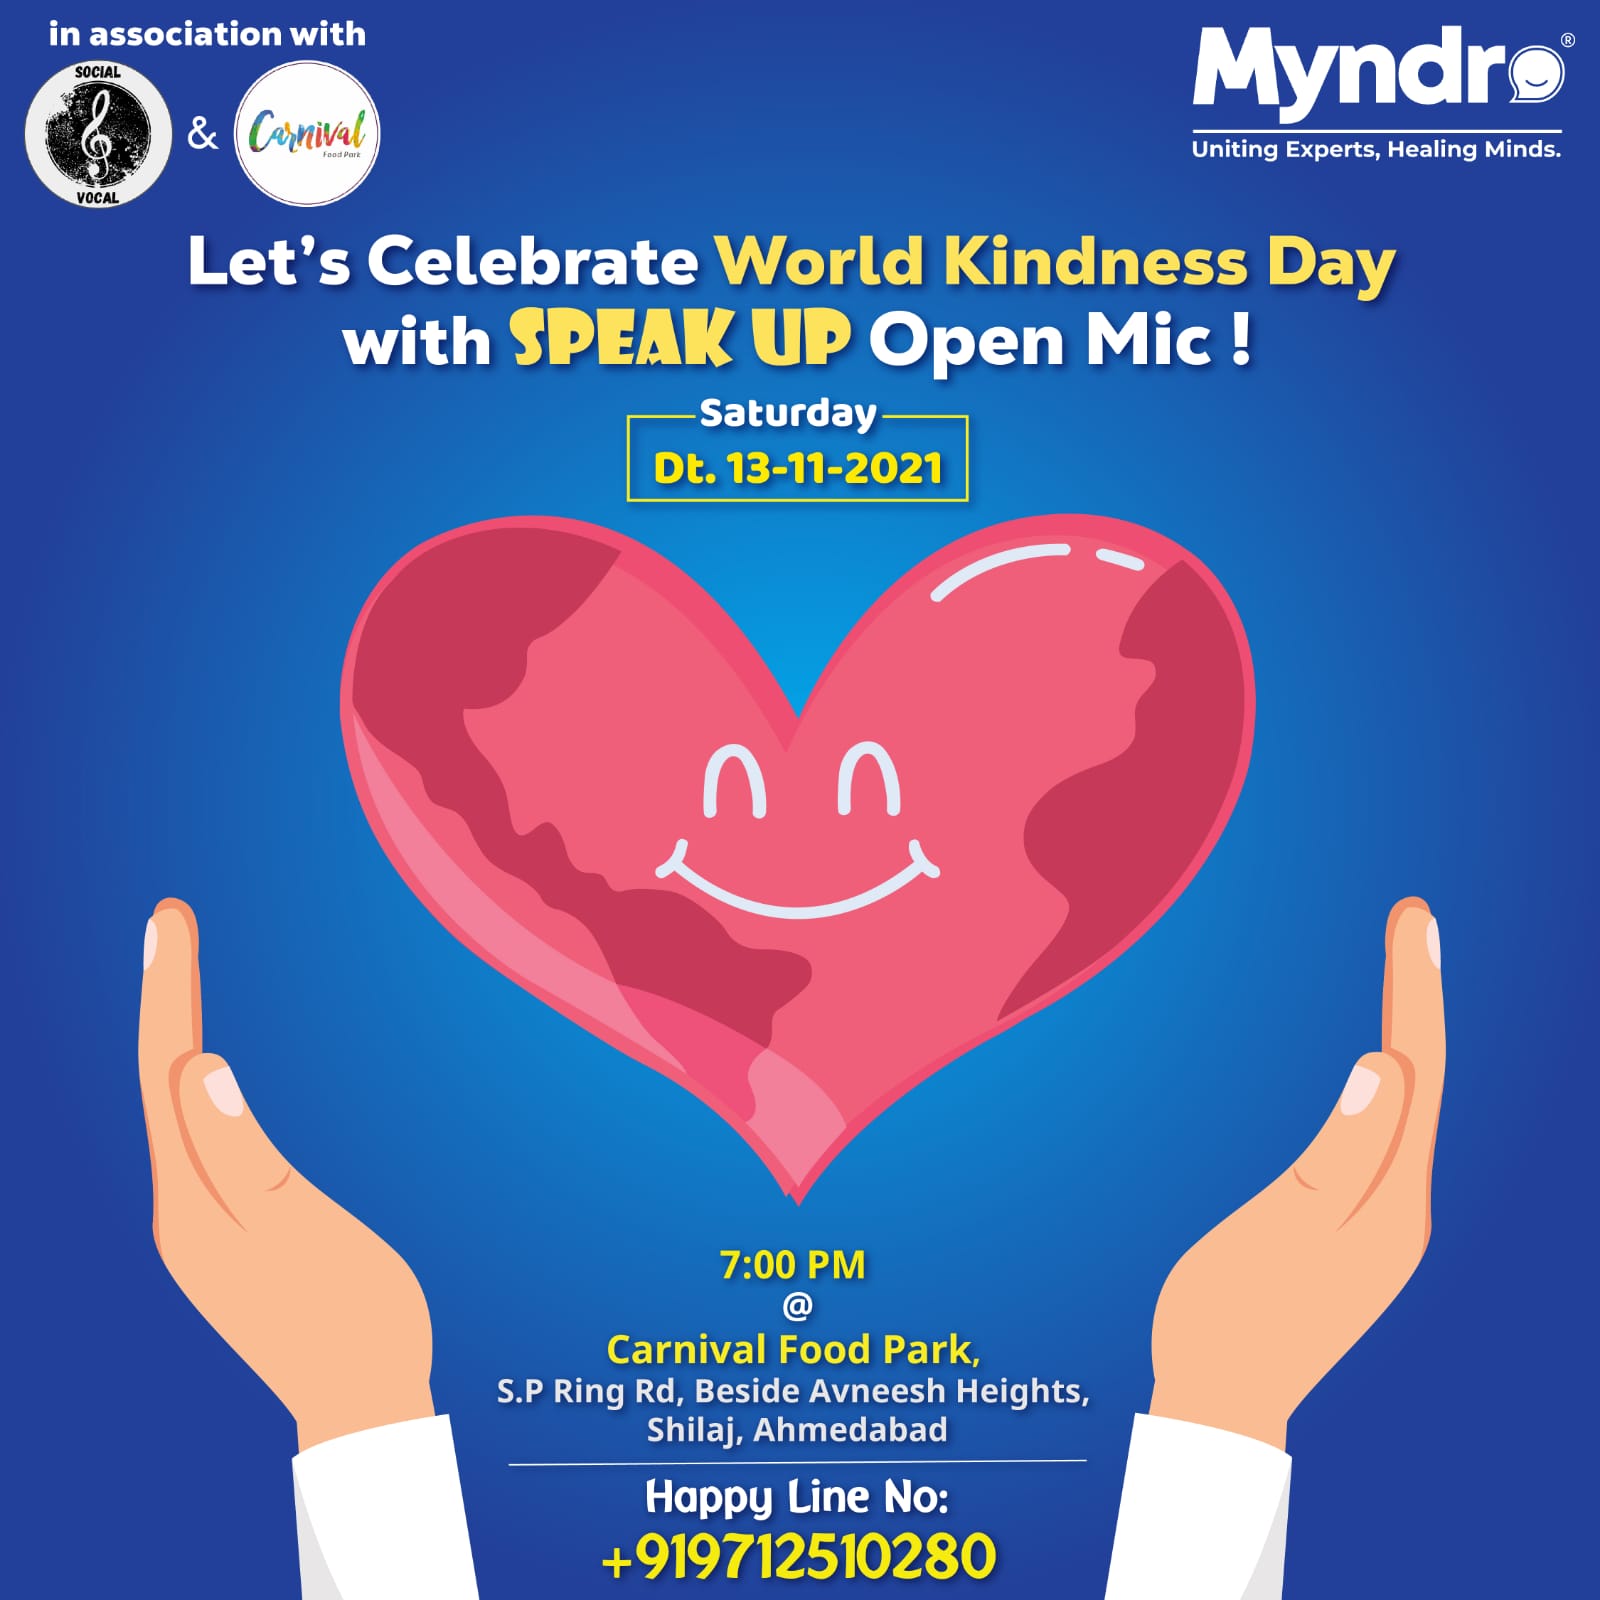 Open Mic on World Kindness Day 2021 at Carnival Food Park, Ahmedabad, Gujarat, India